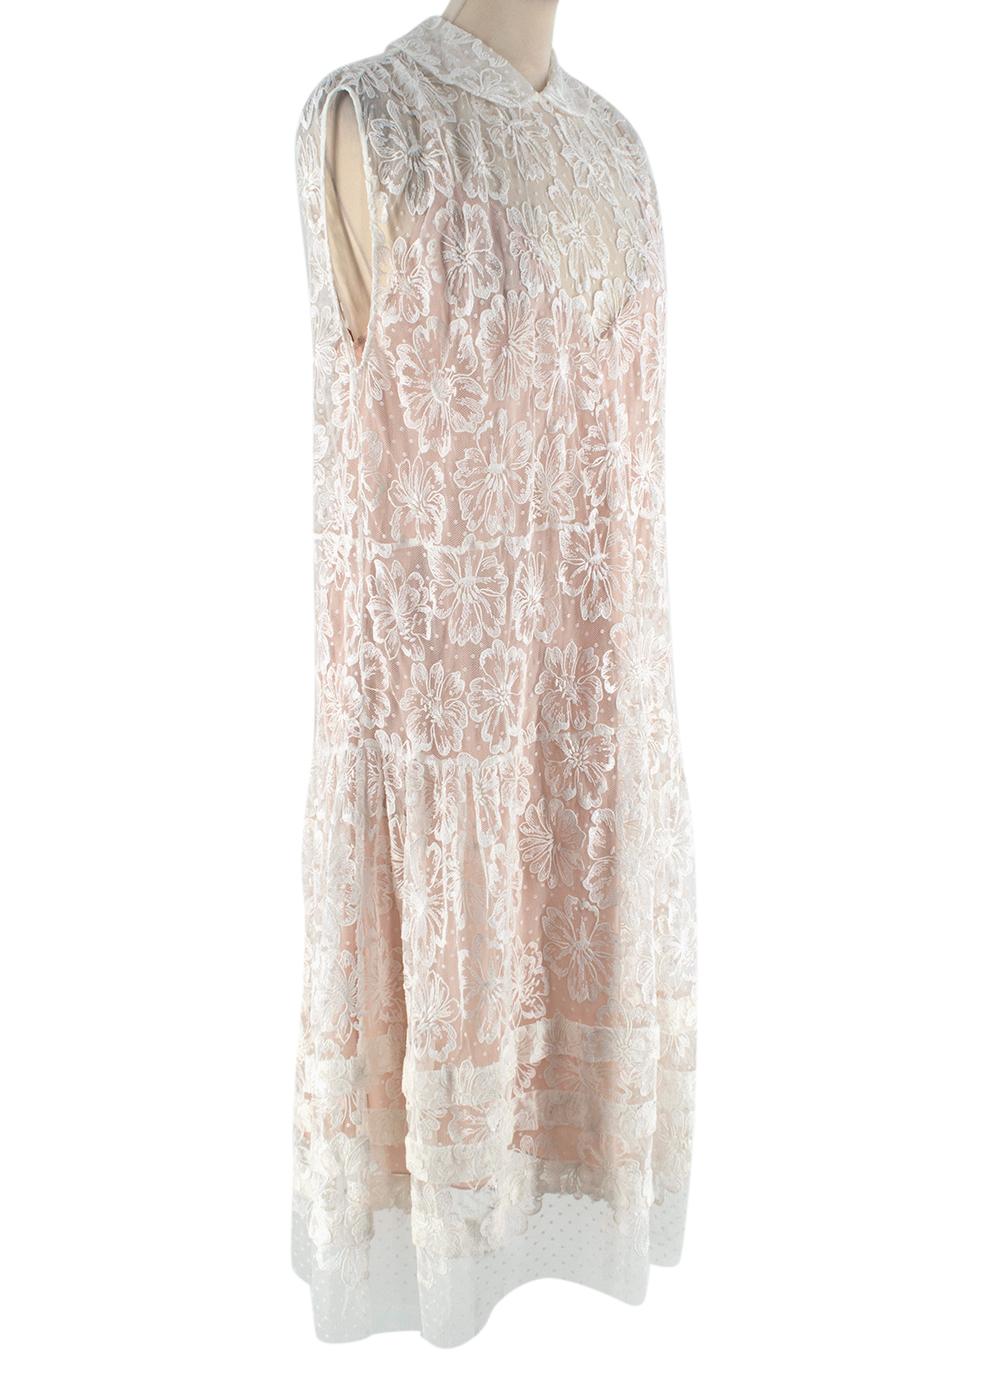 Miu Miu White Floral Lace Sleeveless Dress

- Sleeveless lace midi dress
- Knee-length 
- Peter Pan collar
- Floral and polka dot lace patterns
- Button fastening at the nape of the neck
- Three stripes detail at the end 
- In-built light pink